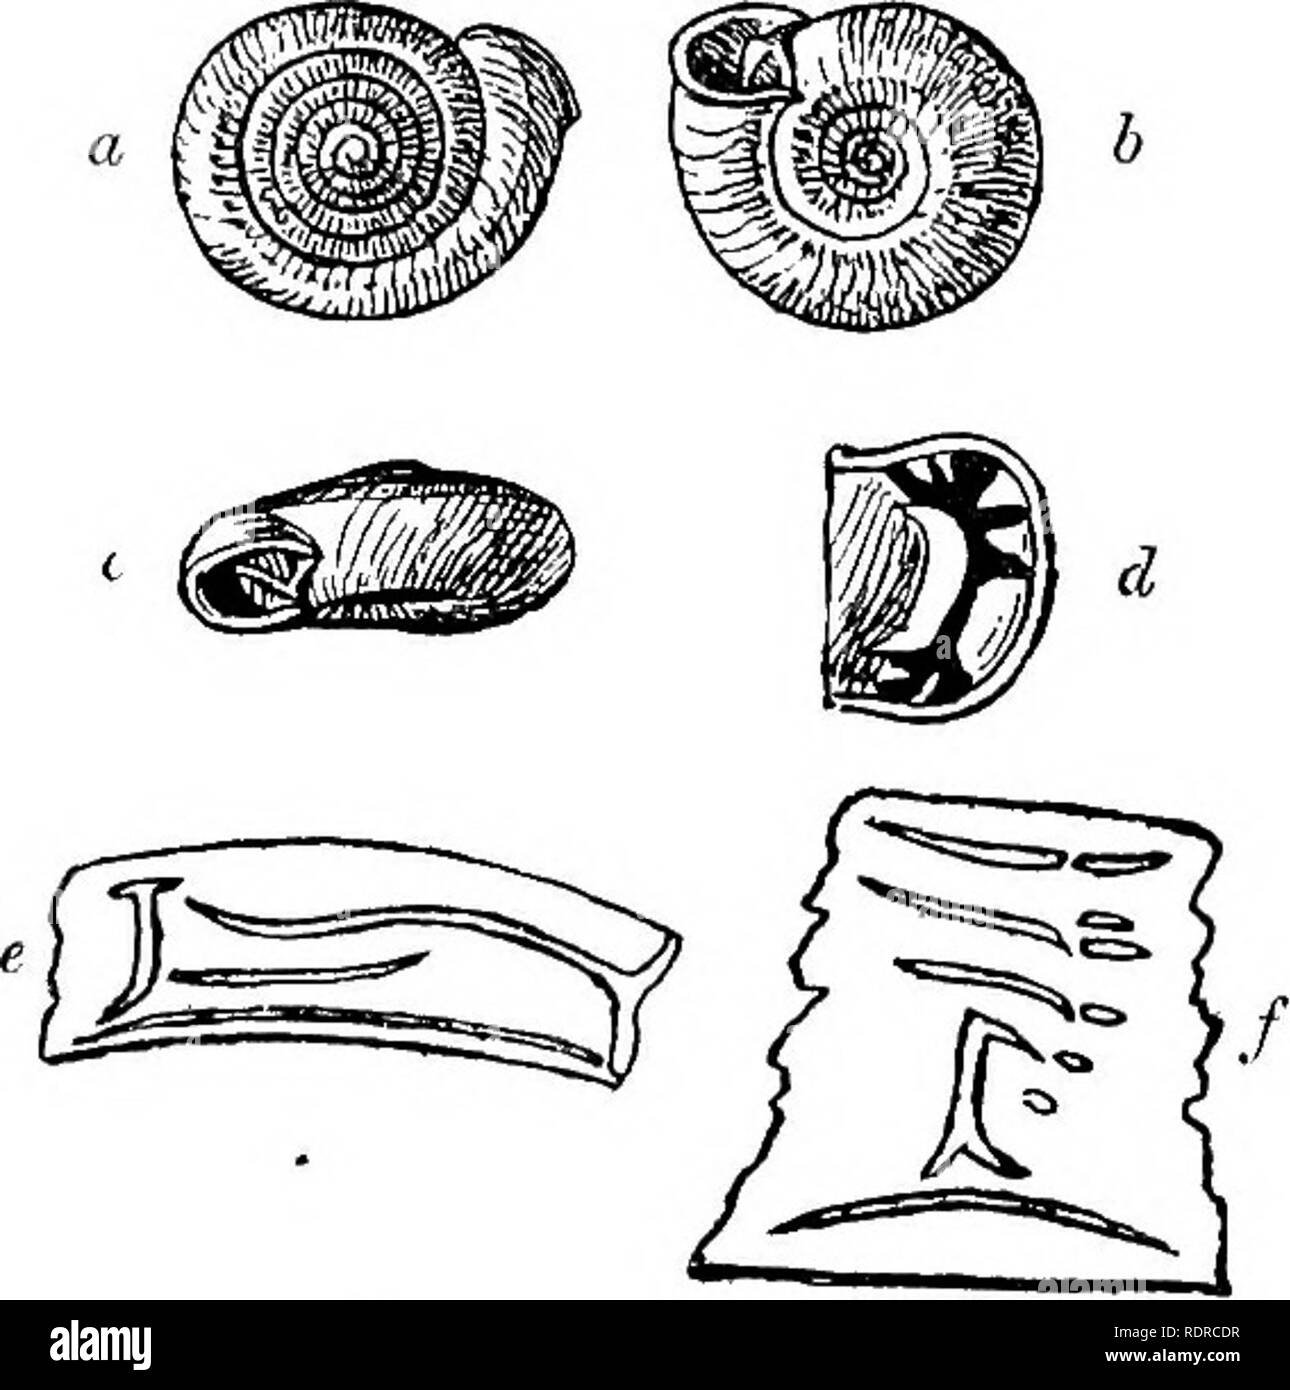 . Mollusca ... Mollusks. 104 HBLIOIDJE. flattened, apex a little raised. Whorls six to seven, increasing slowly and regularly, flattened above, rounded below, the last angulated above the periphery and round the umbilicus, and descending shortly and abruptly in front. Aperture heart-shaped ; peristome white, scarcely thickened, a little reflected; the mar- gins united by an elevated sinuous ridge on the parietal callus, notched at the lower junction. Umbilicus wide and deep. Parietal wall with a thin vertical plate, strongly deflected posteriorly below, and giving off a short horizontal ridge  Stock Photo